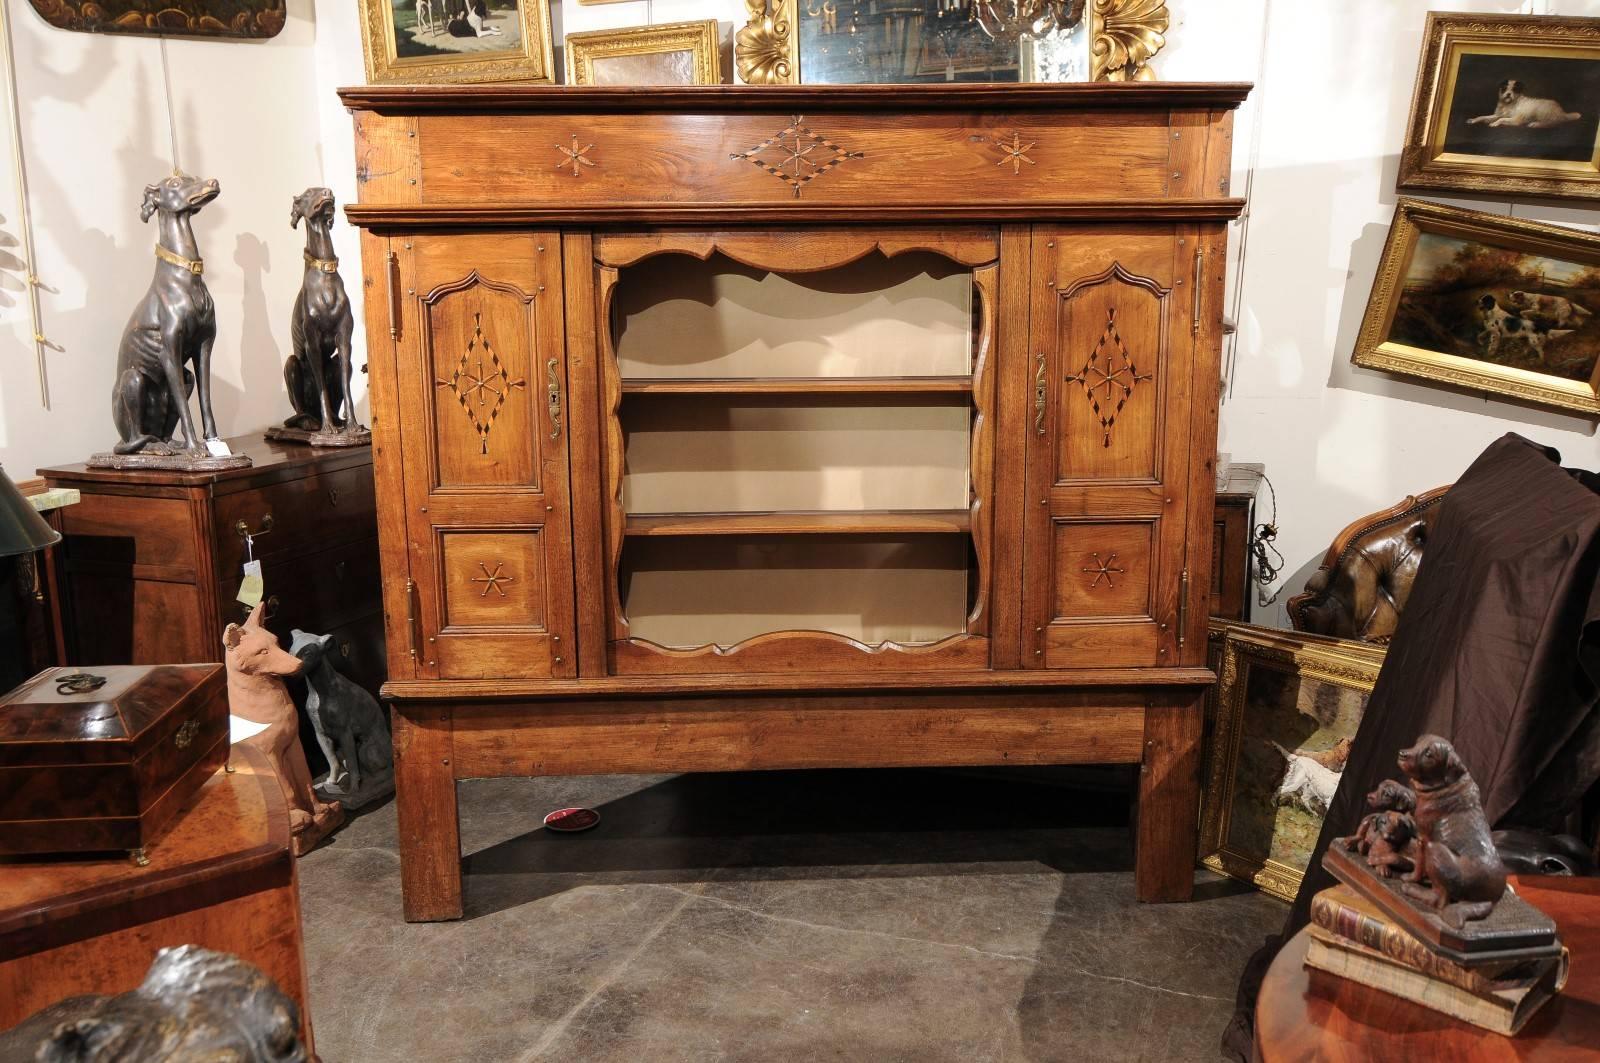 This French 19th century fruitwood vaisselier features a central opened shelving niche beautifully cut-out with a scalloped outline on the surround, flanked with two lateral doors. Each door opens to reveal additional storage and is made of two